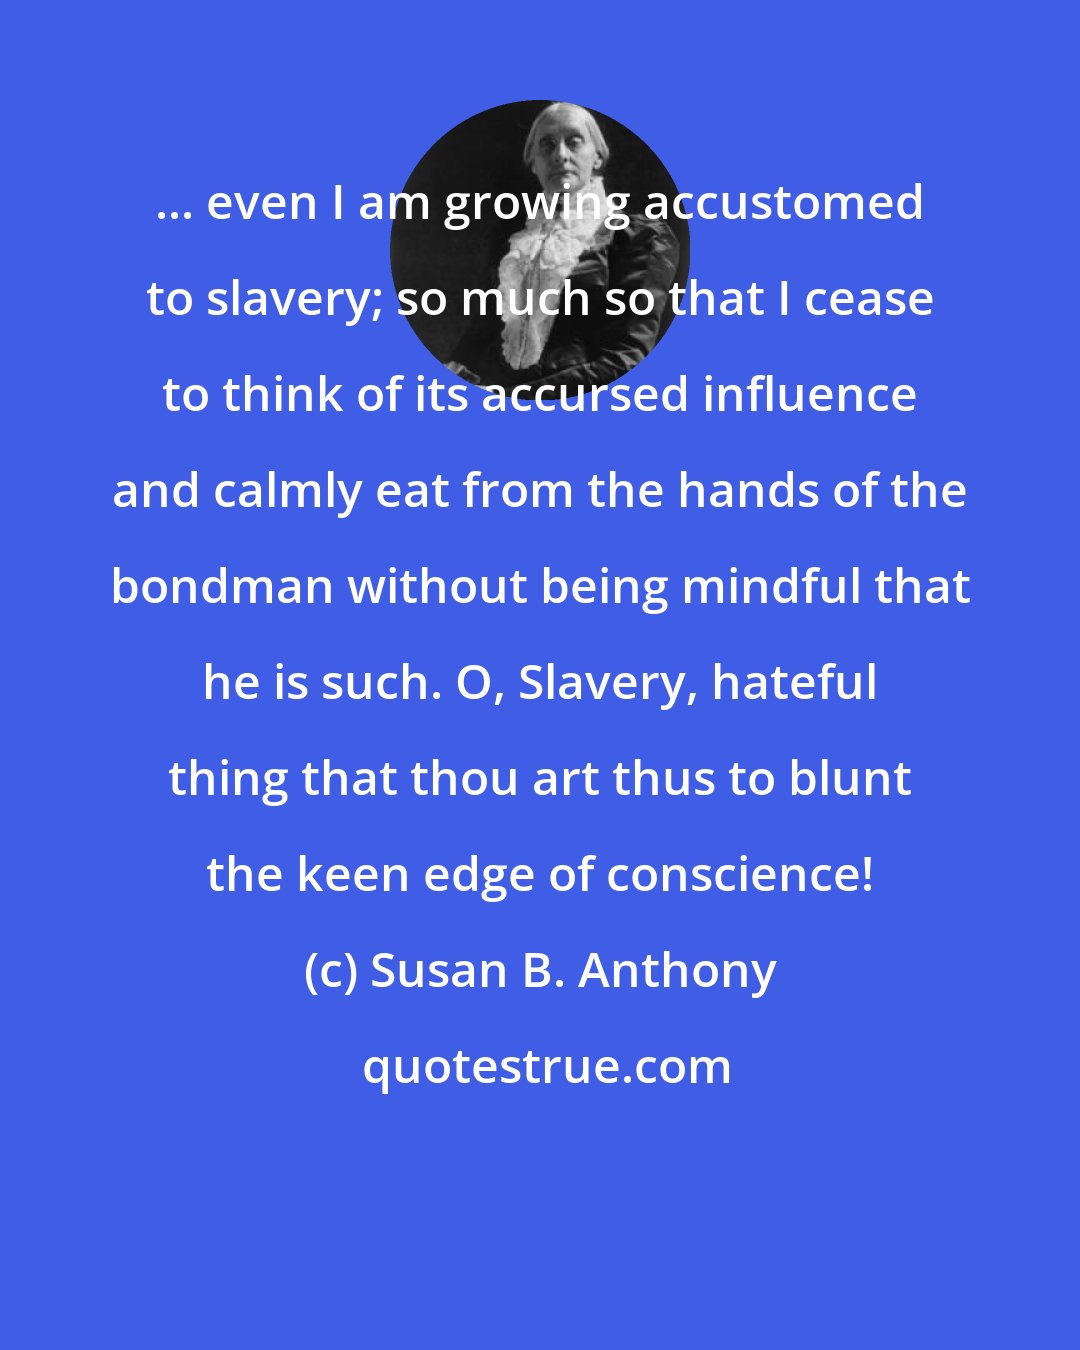 Susan B. Anthony: ... even I am growing accustomed to slavery; so much so that I cease to think of its accursed influence and calmly eat from the hands of the bondman without being mindful that he is such. O, Slavery, hateful thing that thou art thus to blunt the keen edge of conscience!